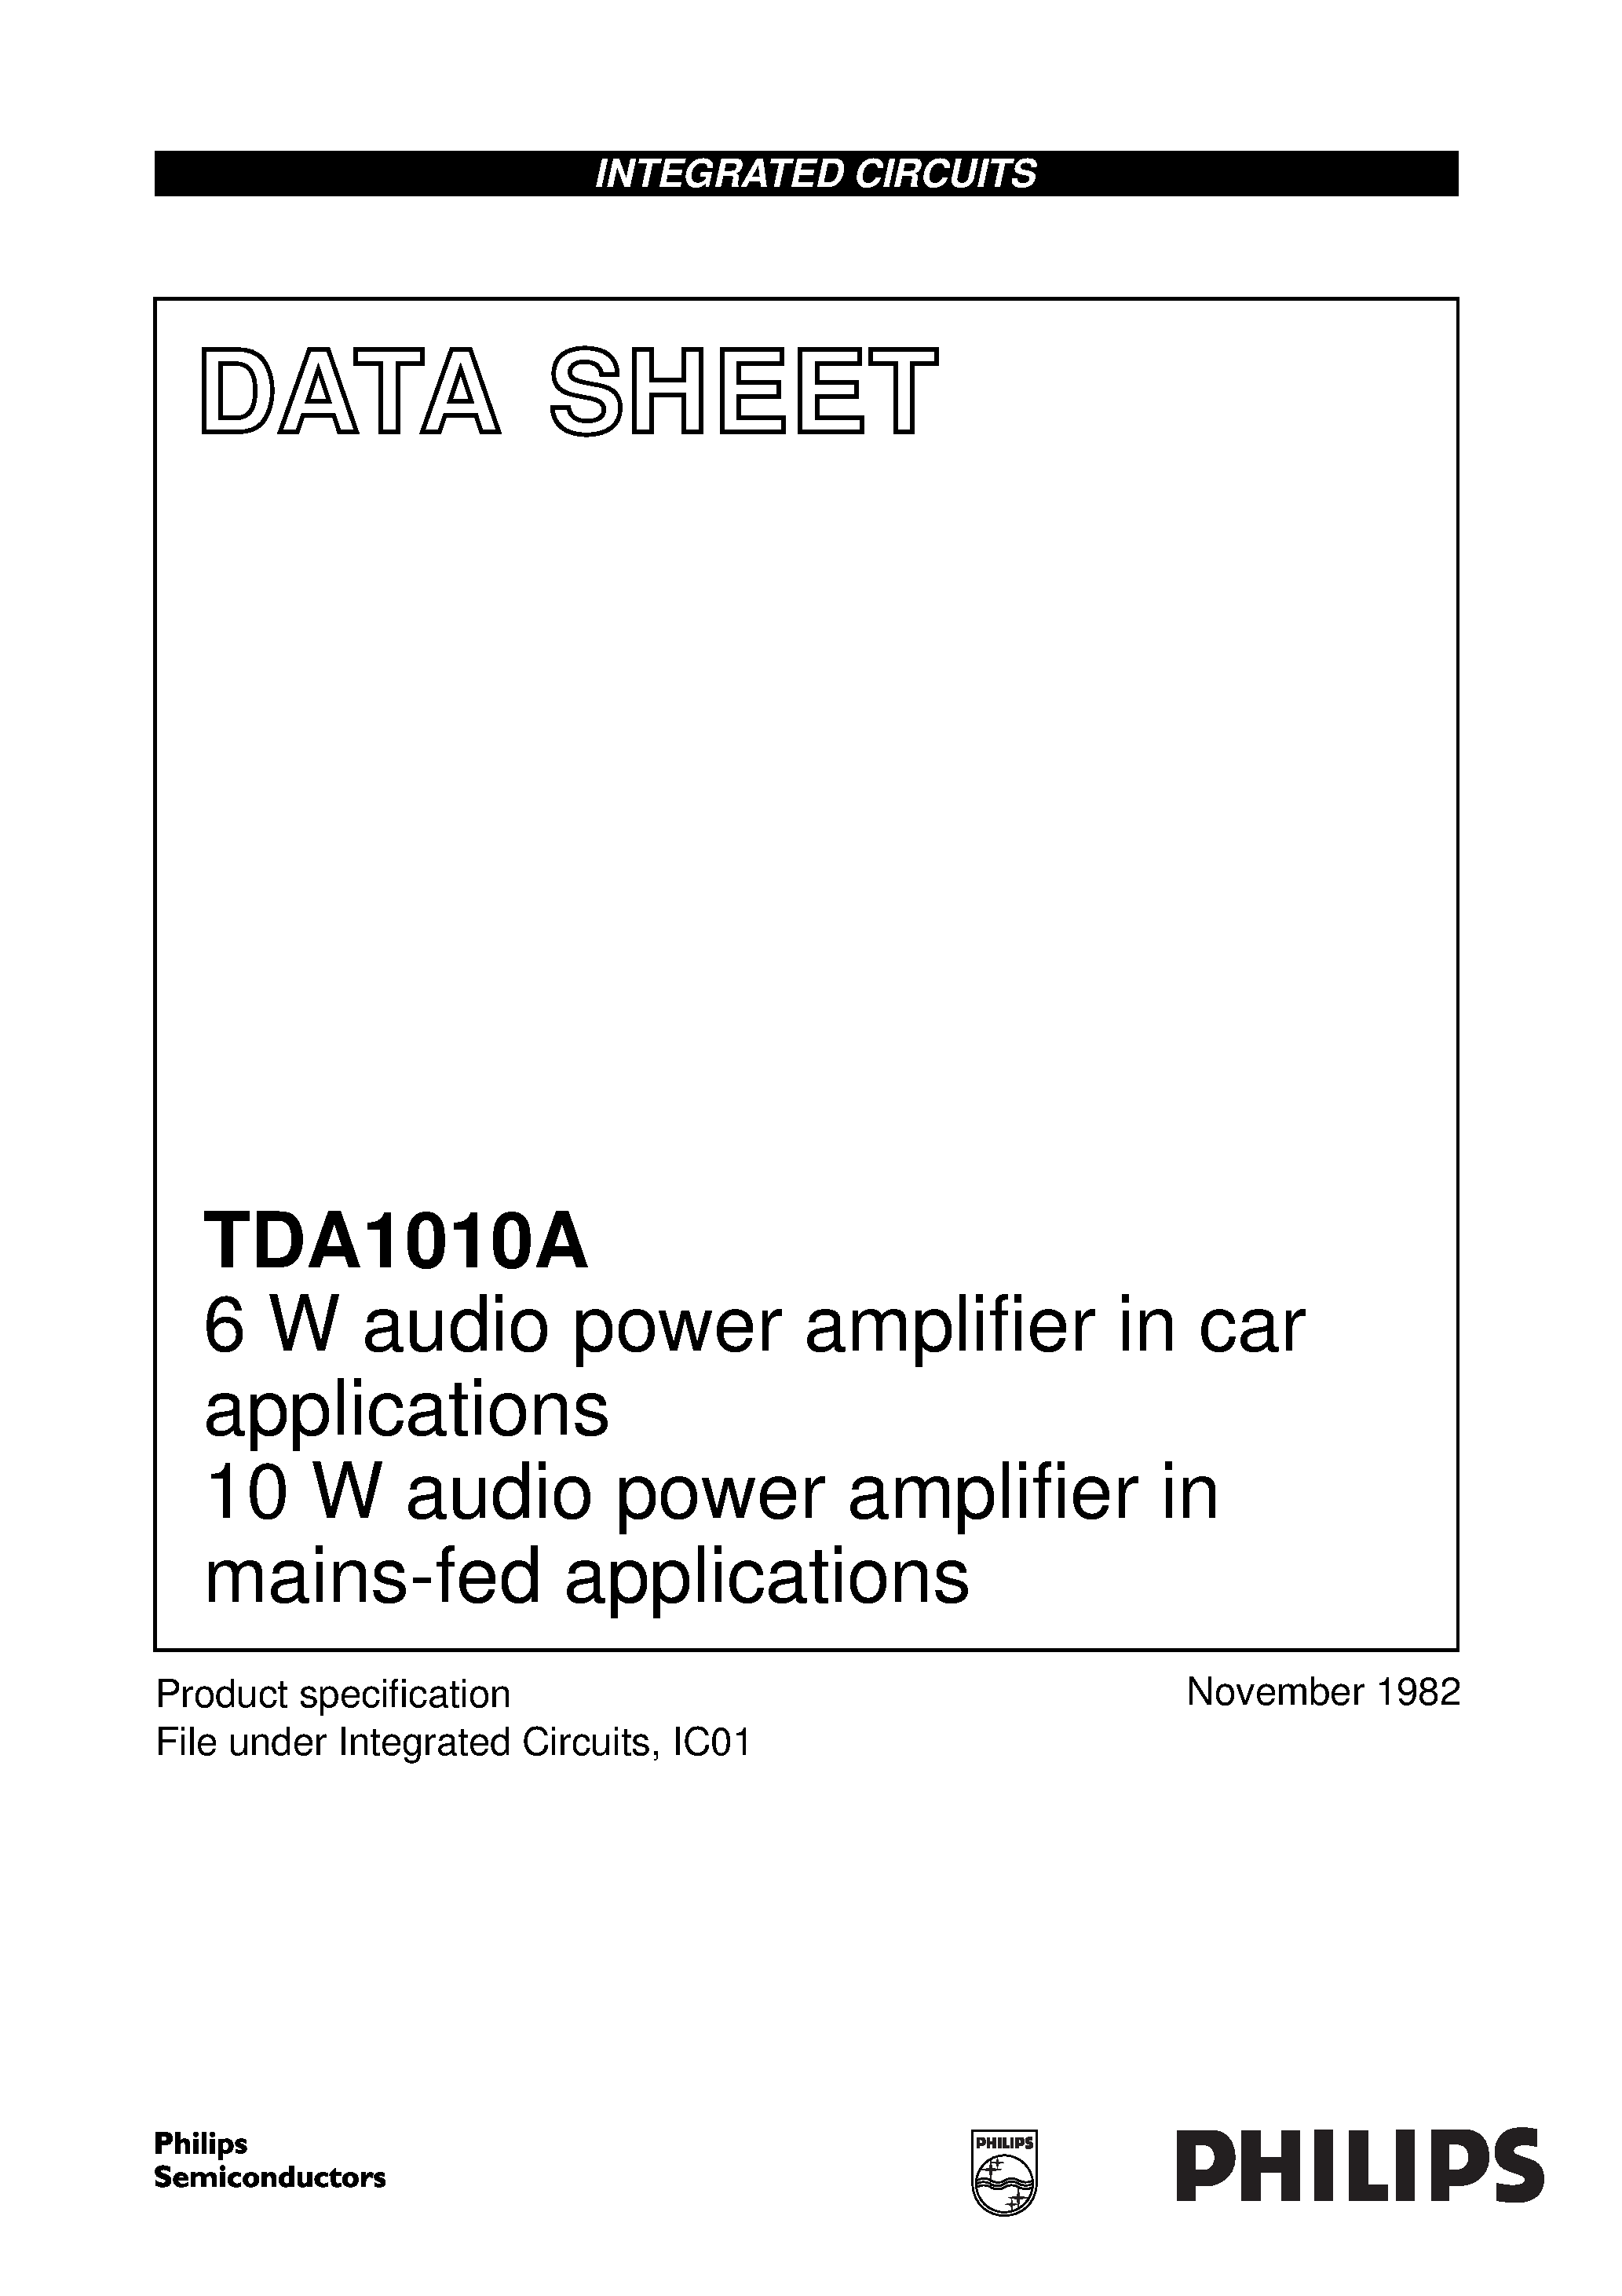 Даташит TDA1010 - 6 W audio power amplifier in car applications 10 W audio power amplifier in mains-fed applications страница 1